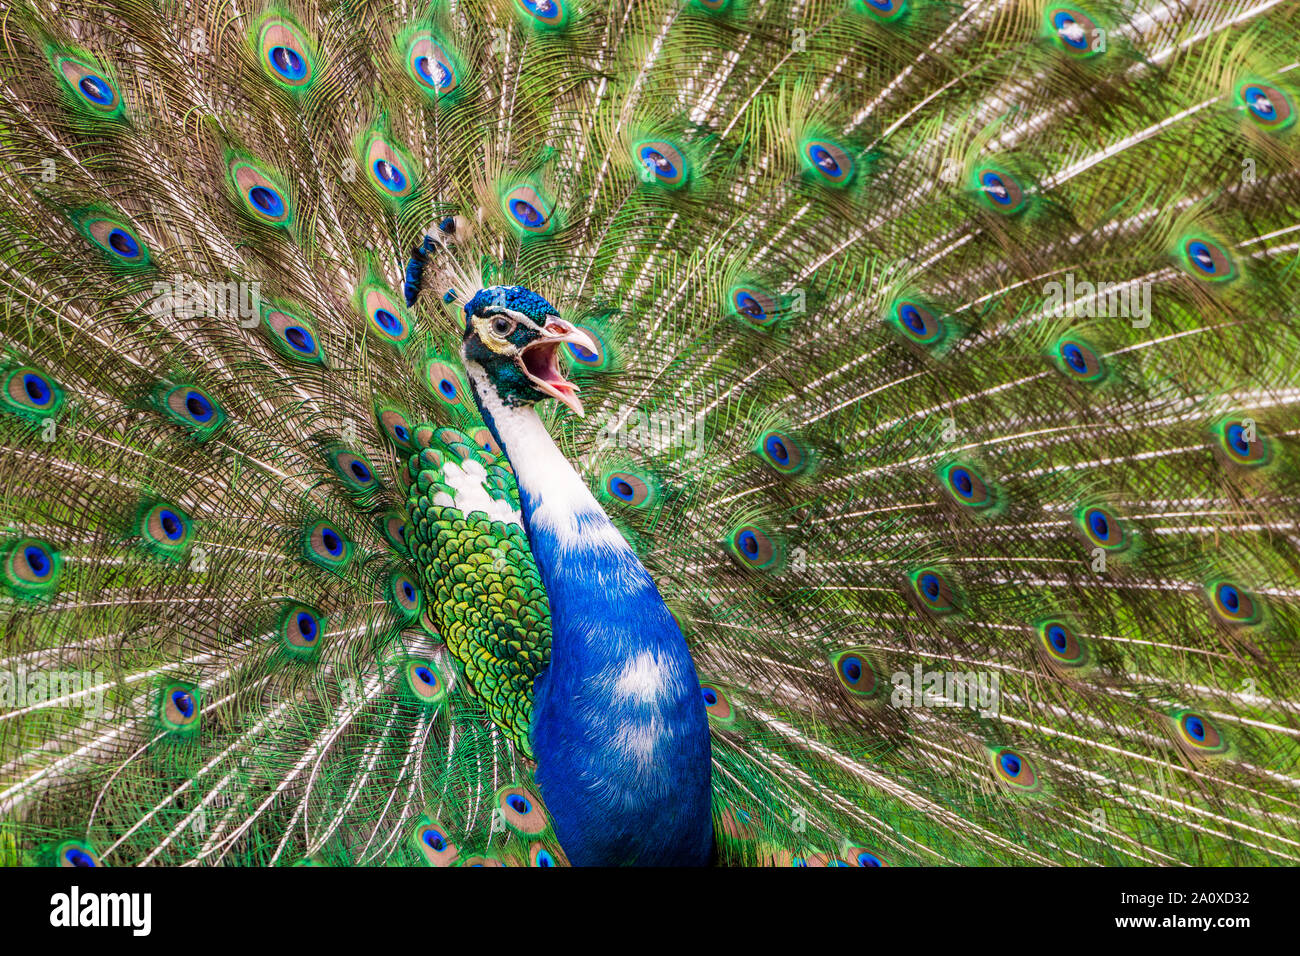 Pied peacock / Indian peafowl (Pavo cristatus) with white coloring, calling and displaying tail feathers - Florida, USA Stock Photo